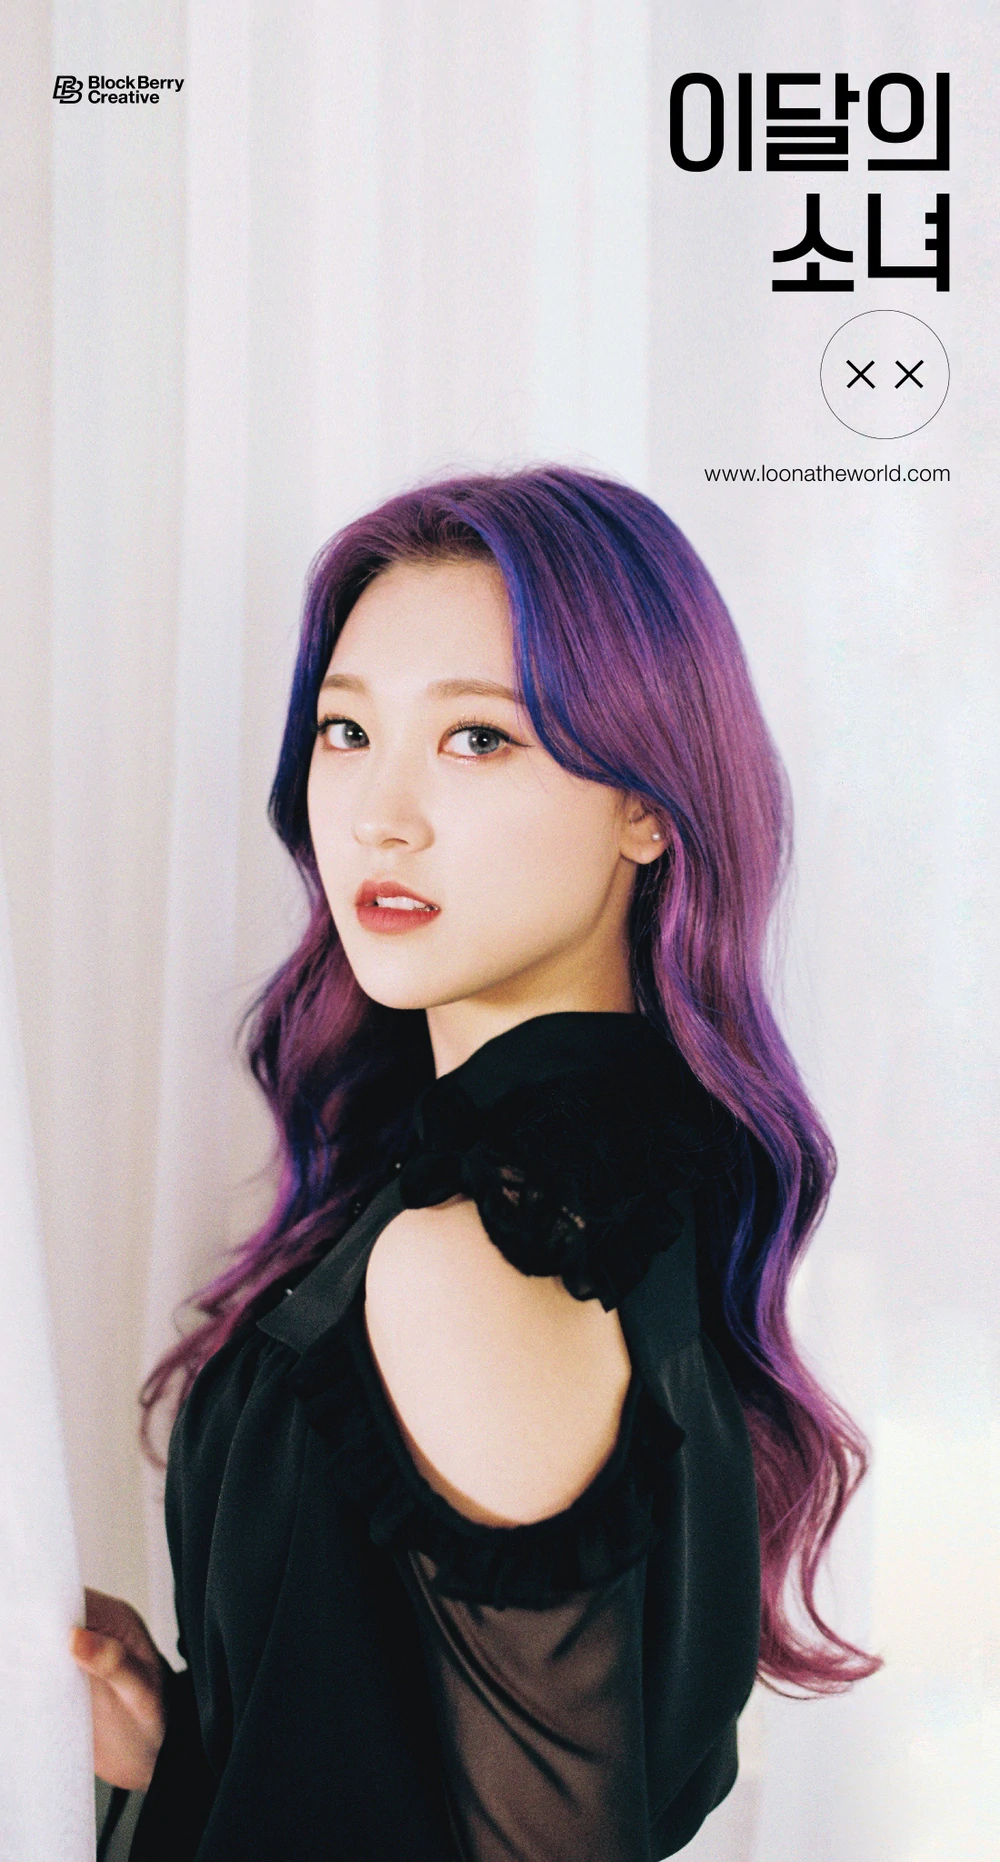 Loona XX Choerry Concept Teaser Picture Image Photo Kpop K-Concept